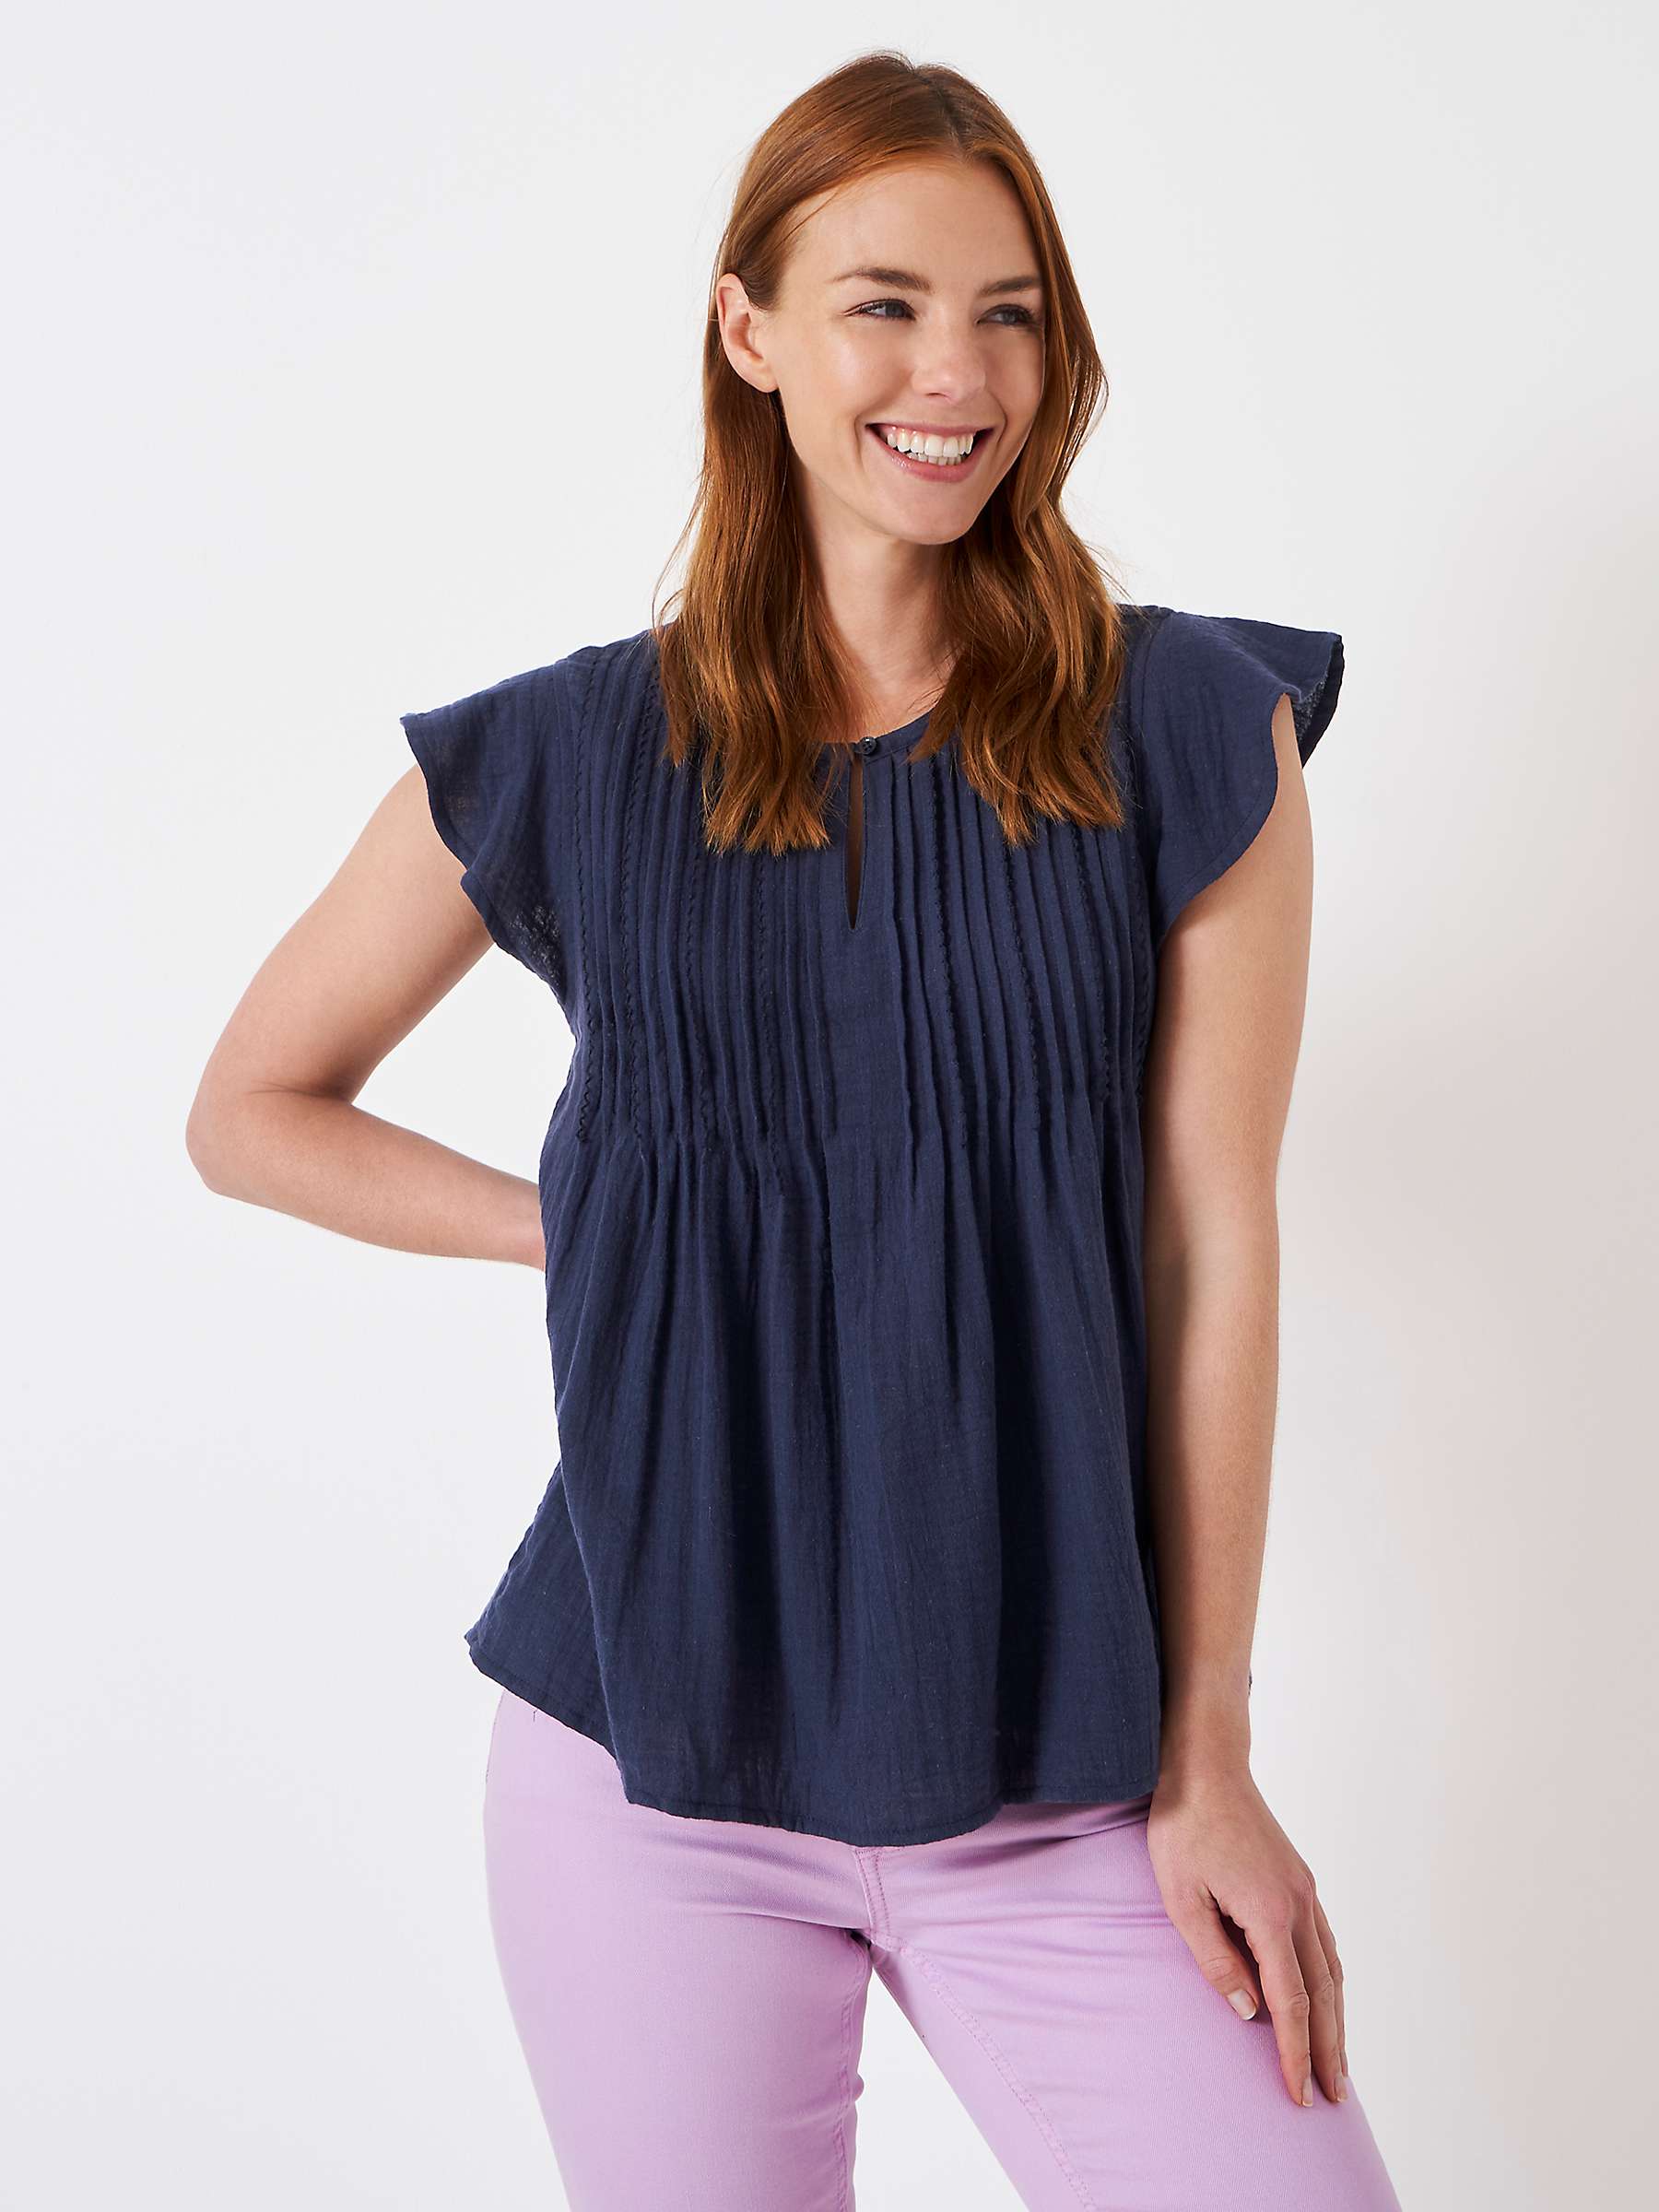 Buy Crew Clothing Colette Keyhole Detail Blouse, Navy Online at johnlewis.com